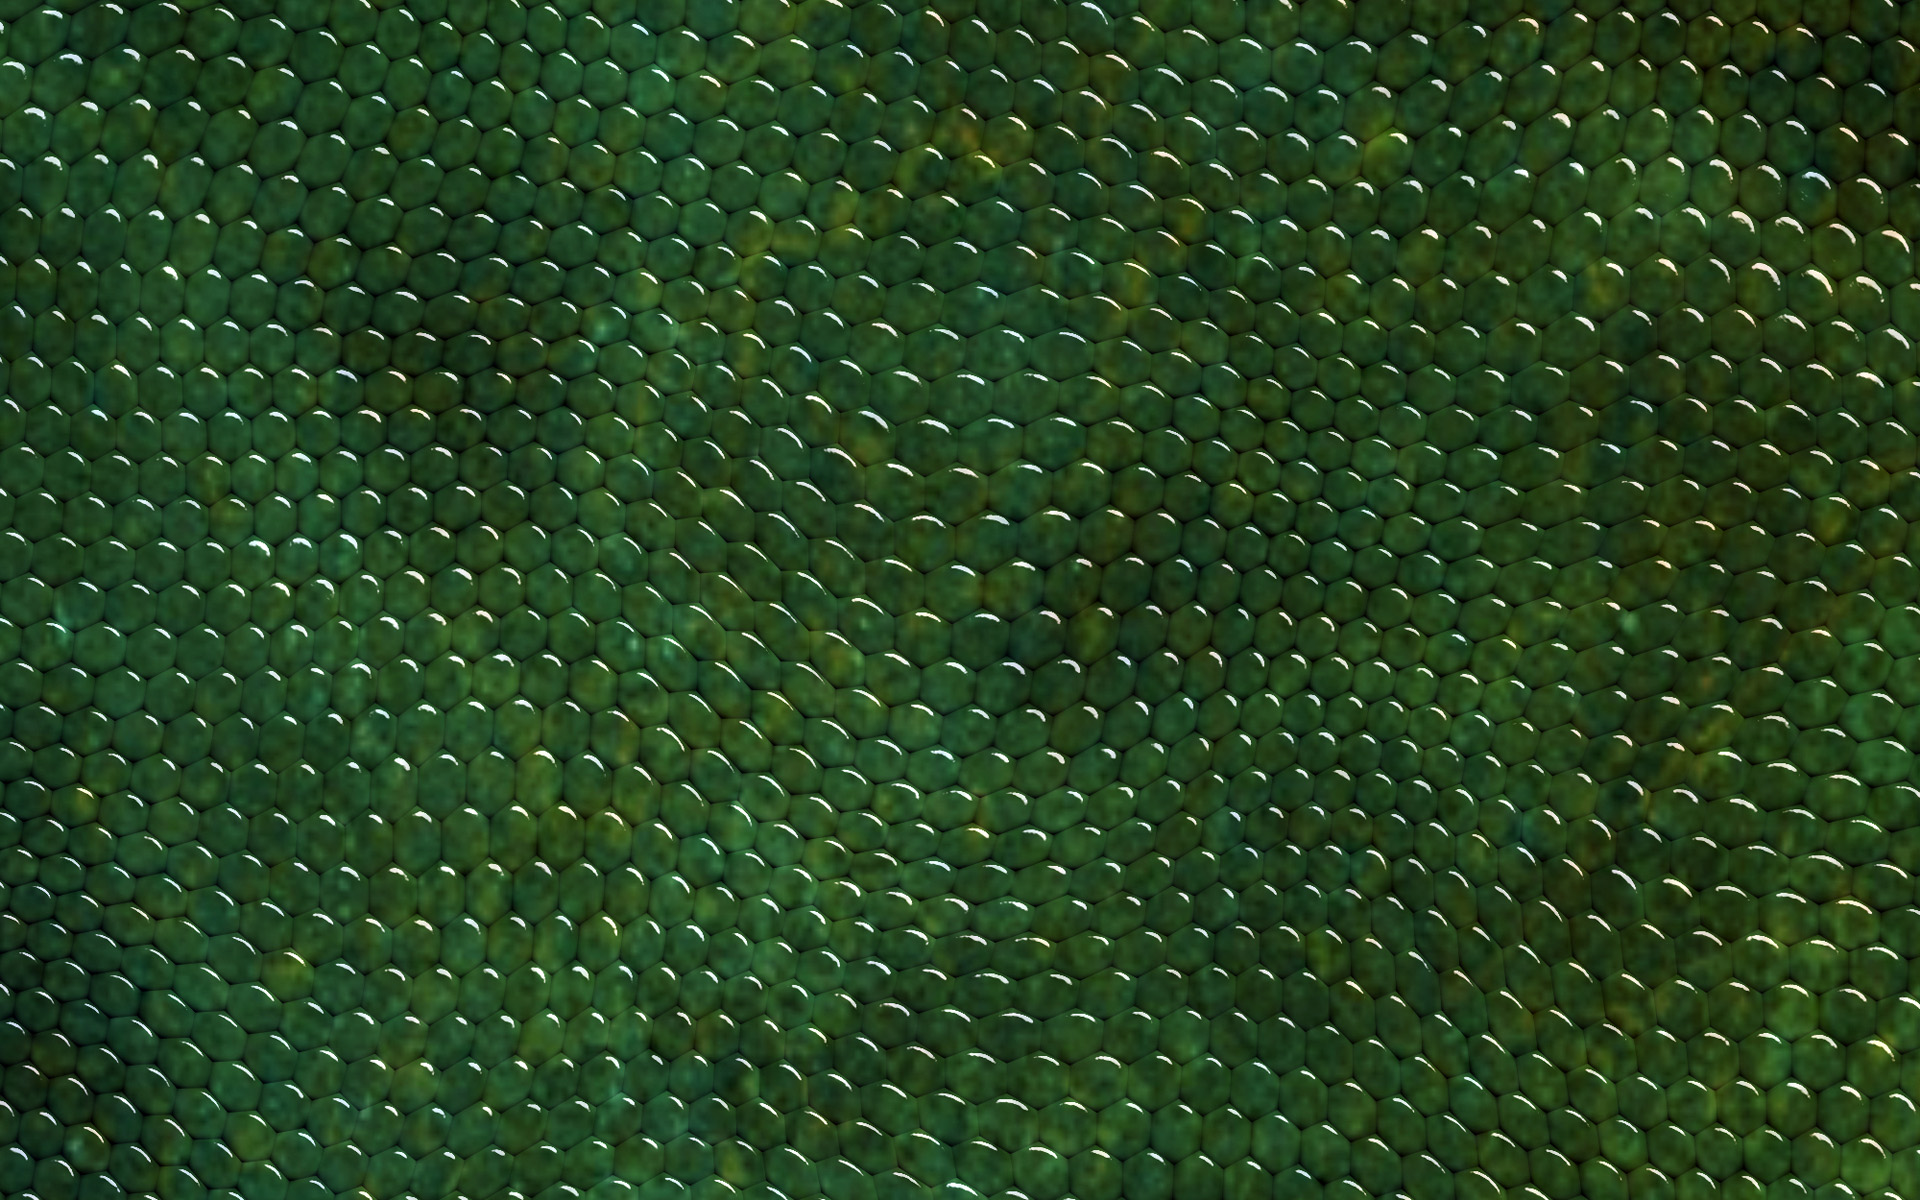 Download Wallpaper Green Snake Skin, Close Up, Reptile Skin, Snake Skin Textures, Green Snake, Macro, Leather Background, Snake Skin For Desktop With Resolution 1920x1200. High Quality HD Picture Wallpaper